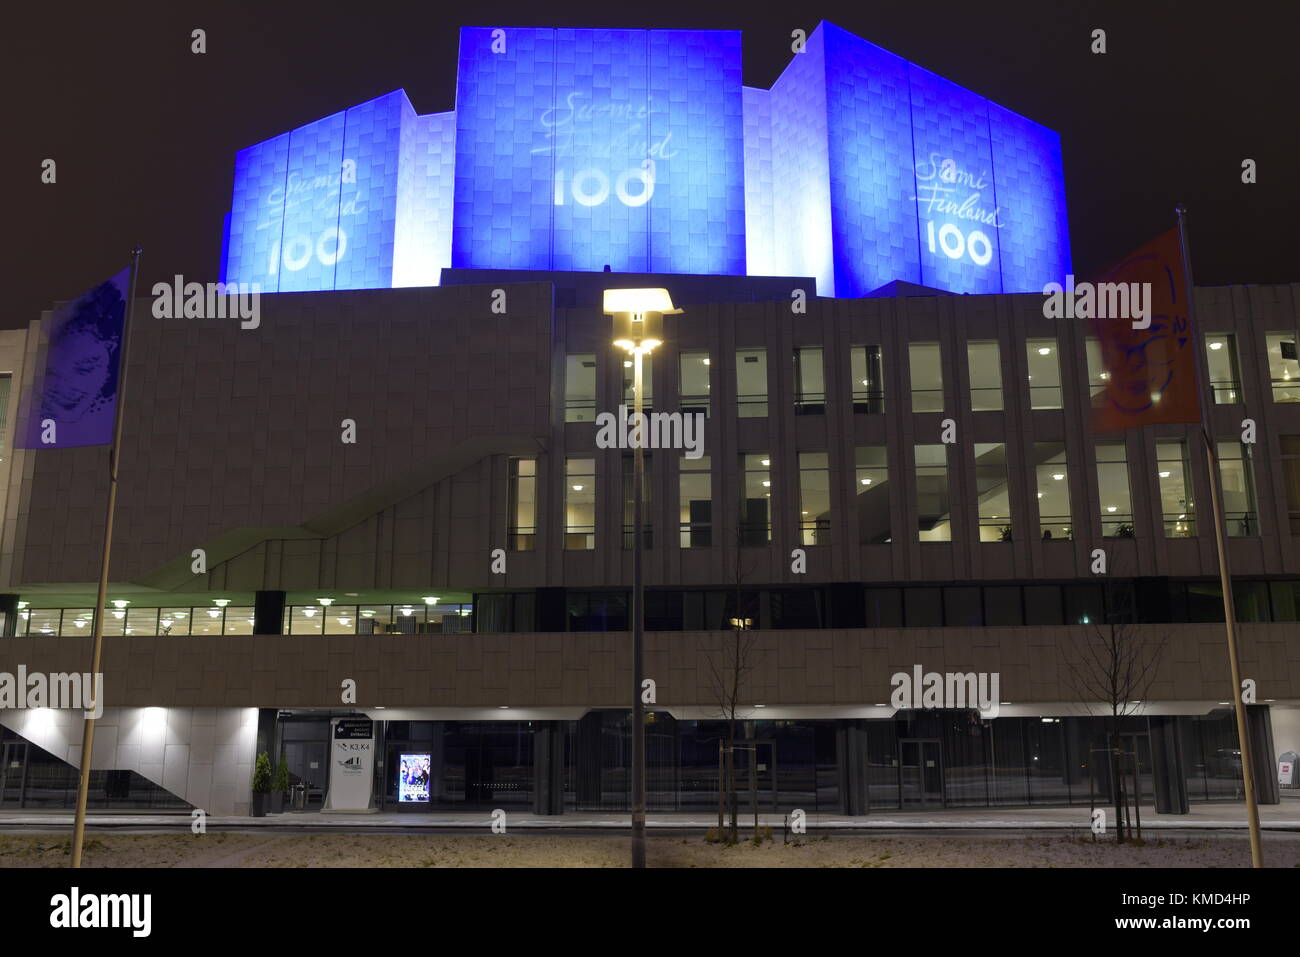 Helsinki, Finland. 6th December, 2017.  Finlandia Hall decorated in special blue and white color light as part of the celebration of 100th anniversary of Finland's independence. Credit: Mikko Palonkorpi/Alamy Live News. Stock Photo